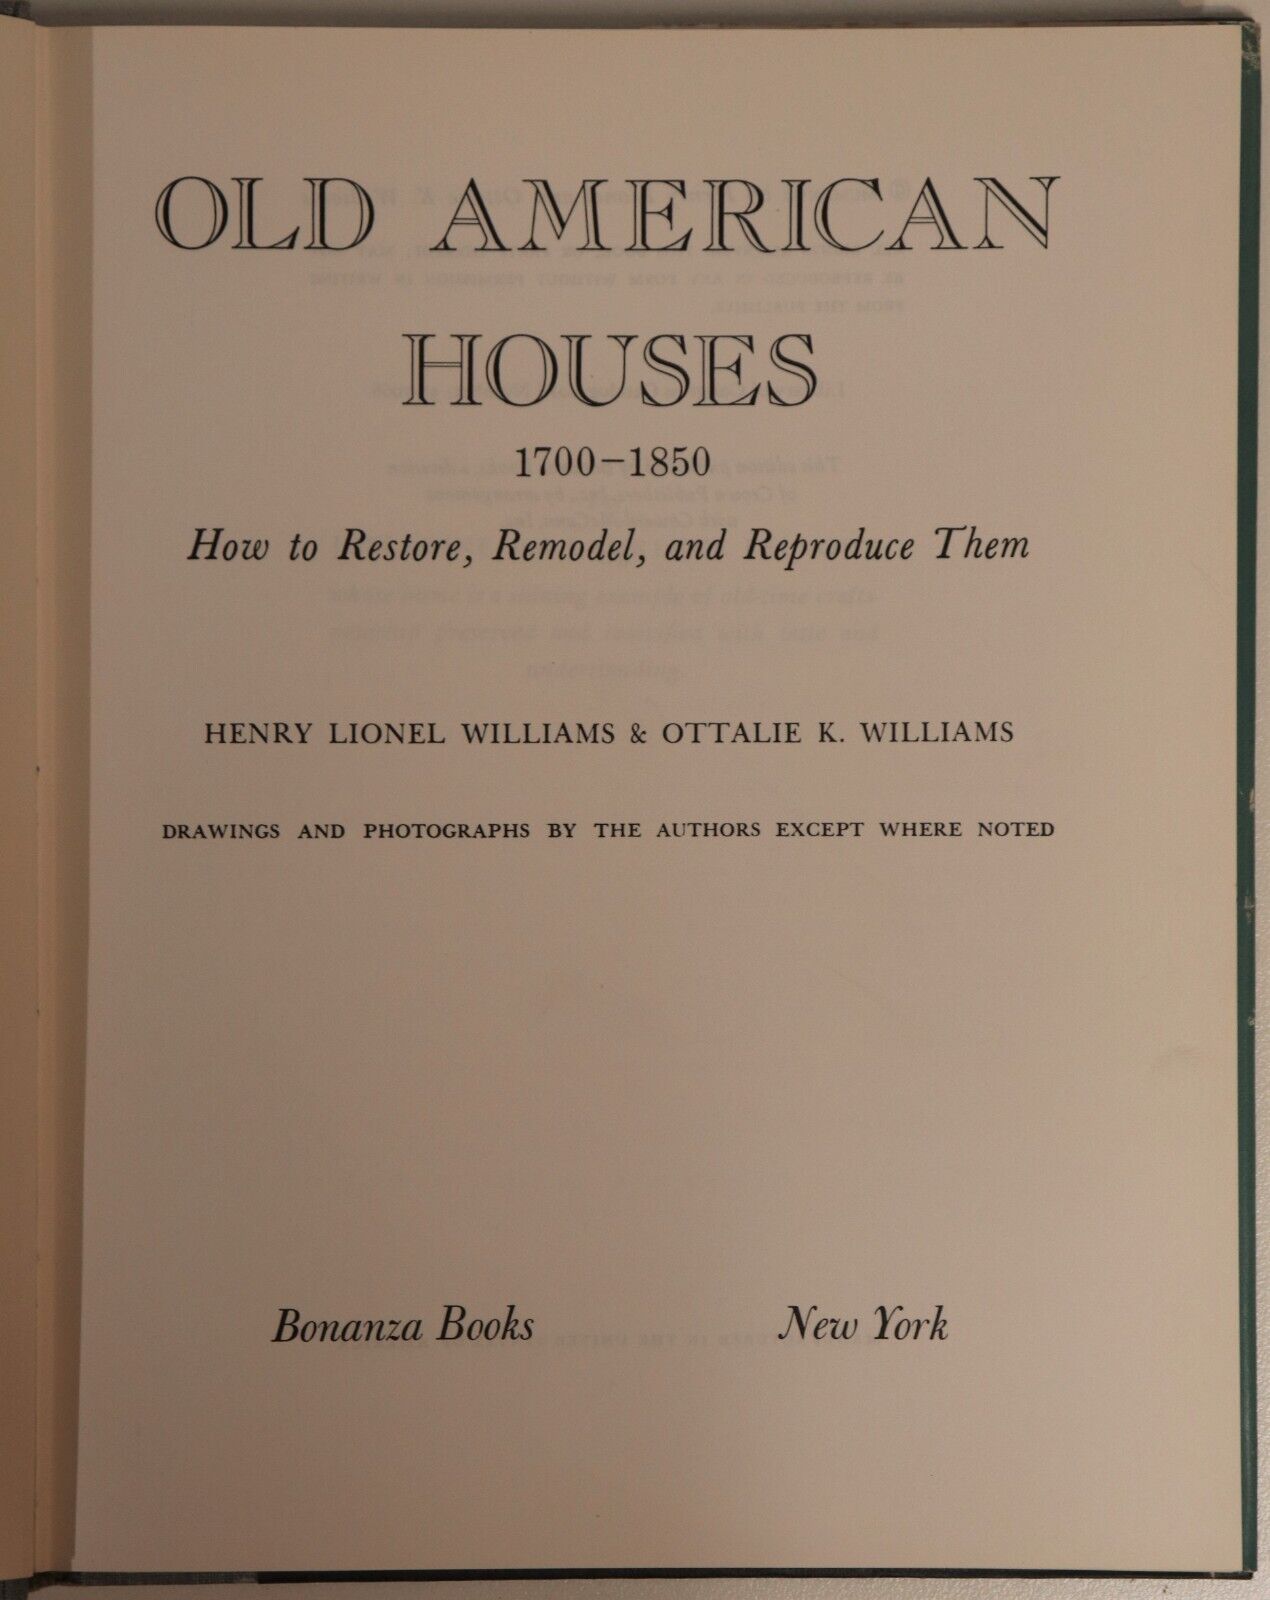 Old American Houses by H&O Williams - 1967 - Vintage American Architecture Book - 0